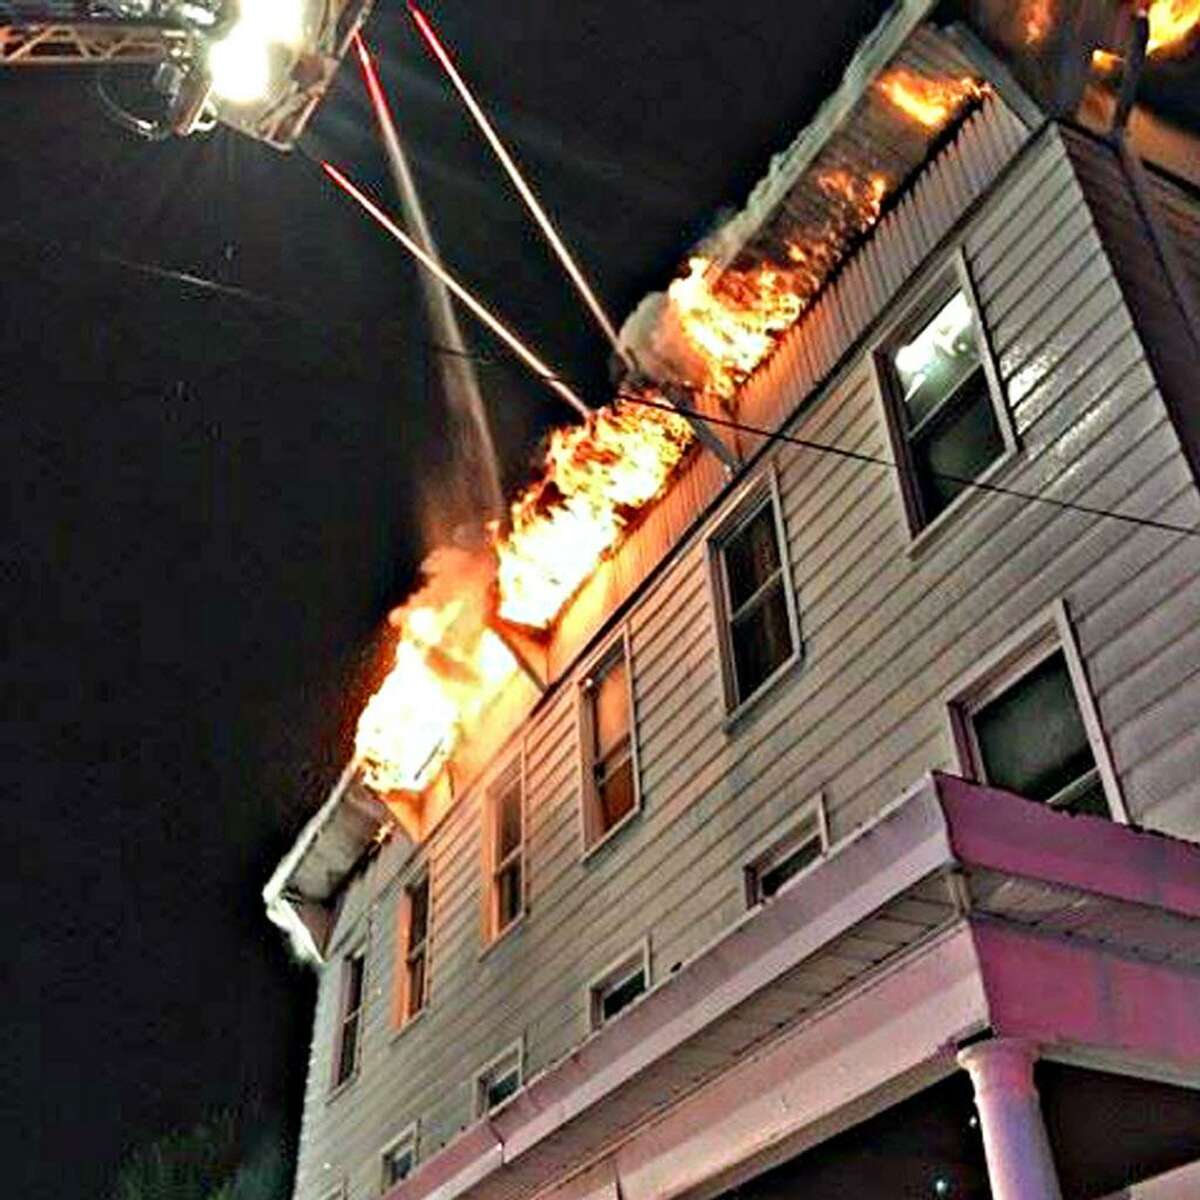 The blaze originated on a second-floor porch at the back, where an individual was grilling. There were no injuries in the fire, which began just before 10:45 p.m., the fire chief said.